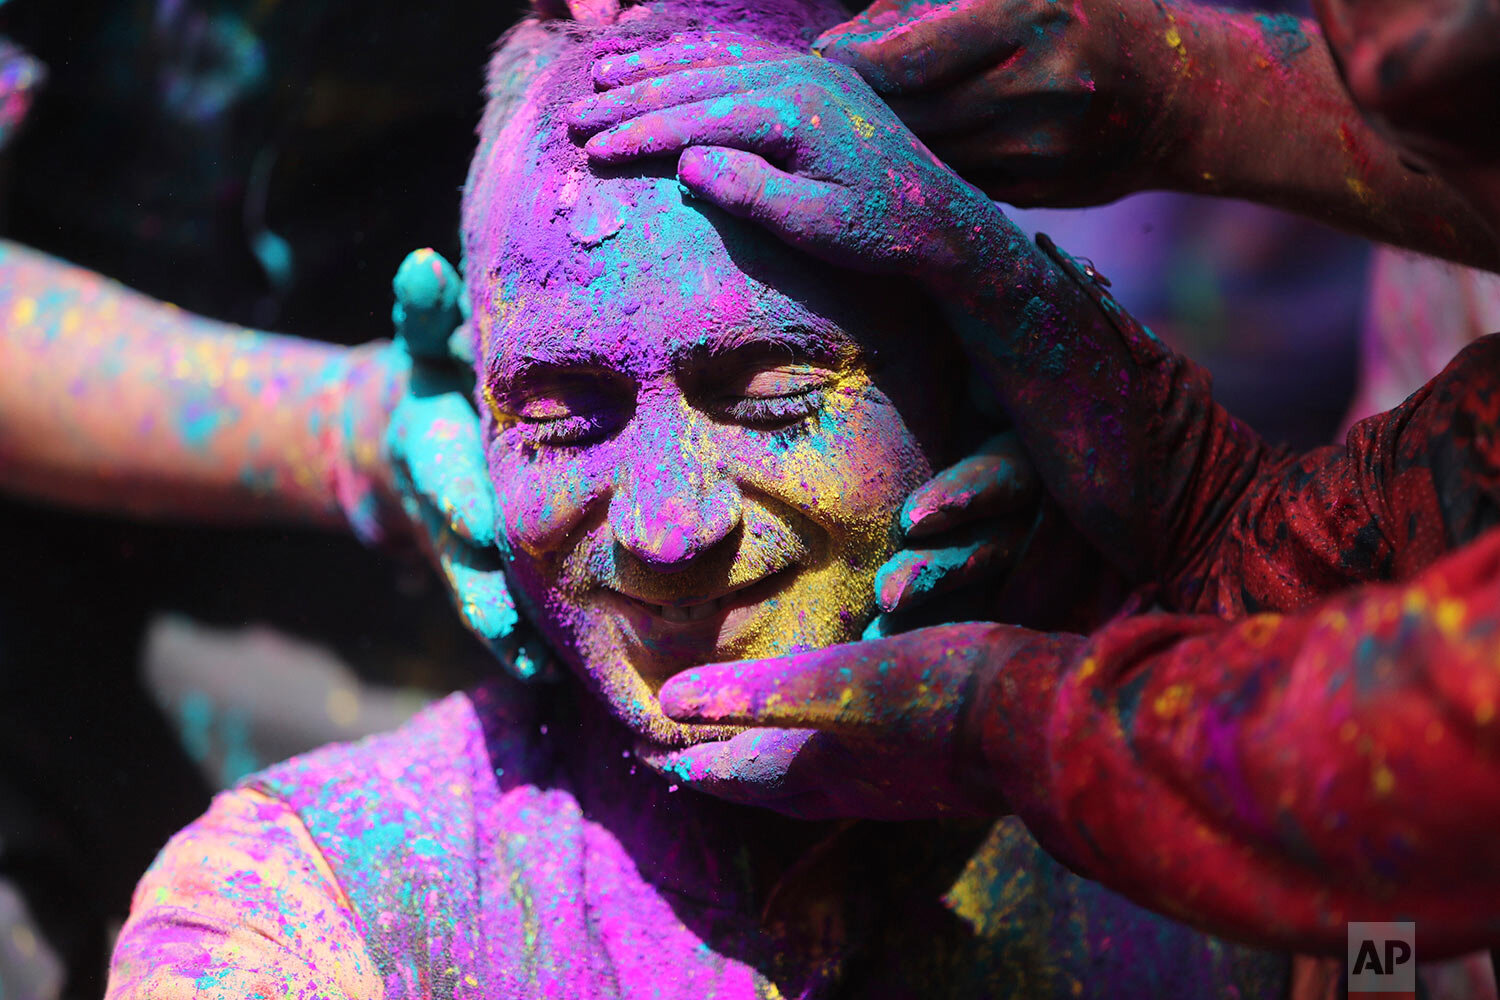  Indians smear colored powder on each other as they celebrate Holi in Jammu, India, Sunday, March 28, 2021. Holi, the Hindu festival of colors, also heralds the arrival of spring. (AP Photo/Channi Anand) 